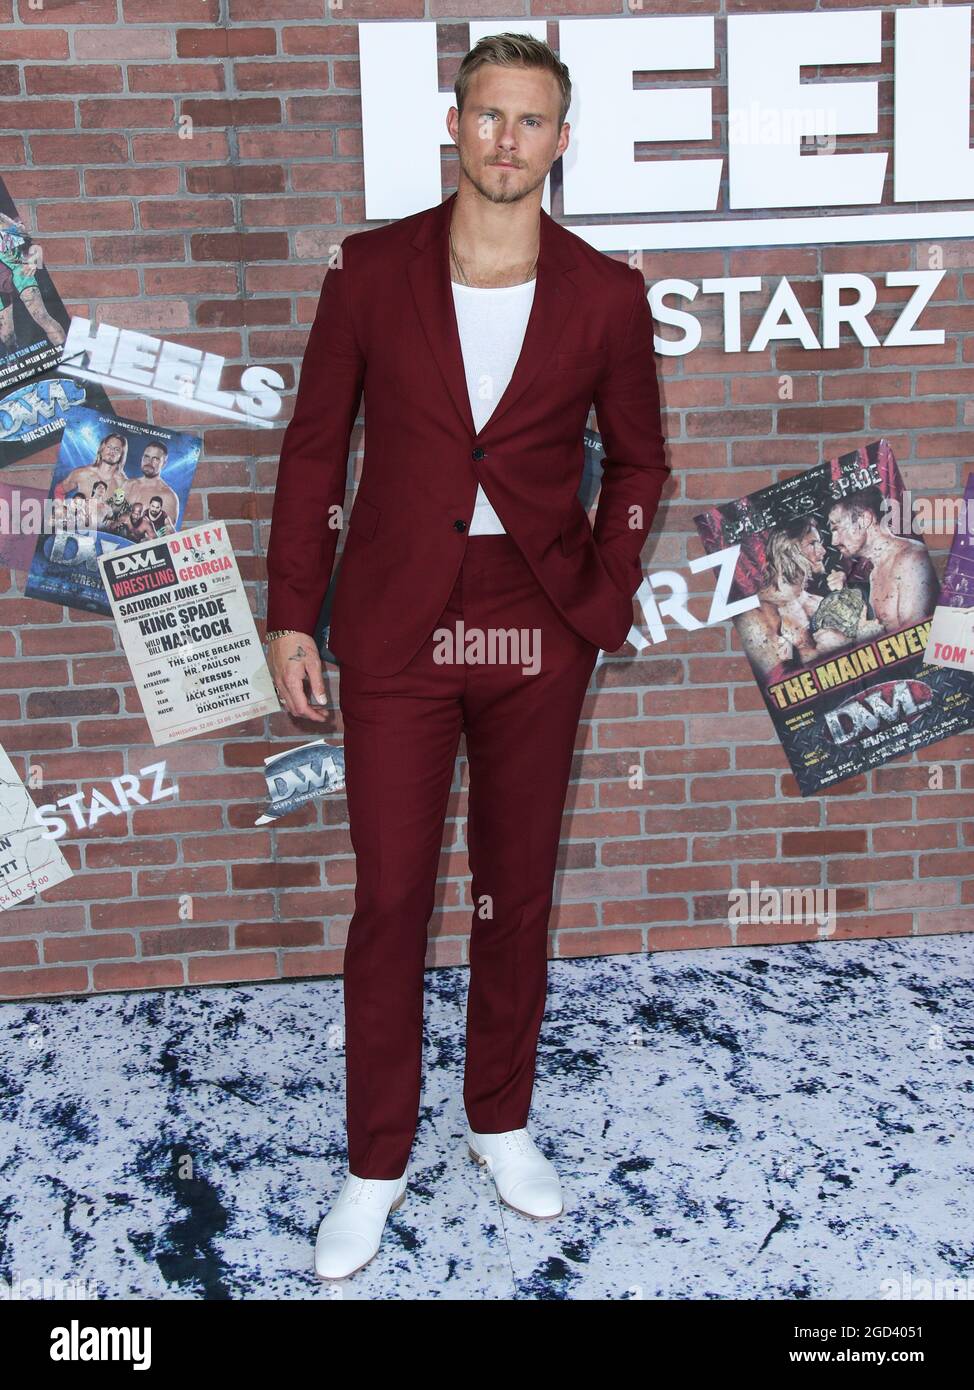 Los Angeles, United States. 10th Aug, 2021. LOS ANGELES, CALIFORNIA, USA -  AUGUST 10: Actor Alexander Ludwig wearing a Paul Smith suit, Christian  Louboutin shoes, a Montblanc water and David Yurman jewelry